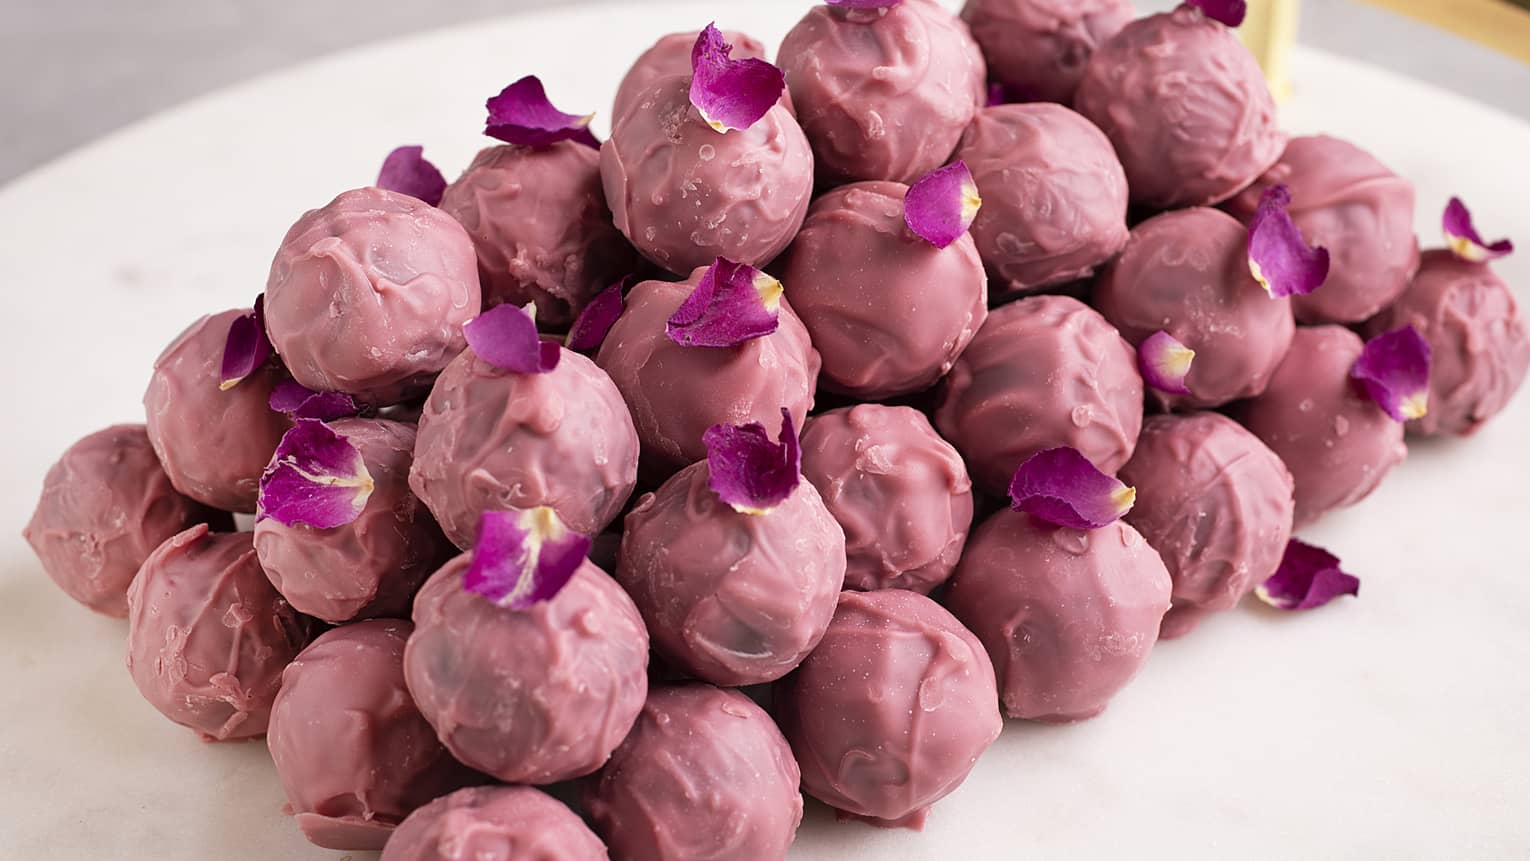 A stack of rose-colored chocolate pralines sprinkled with purple flower petals